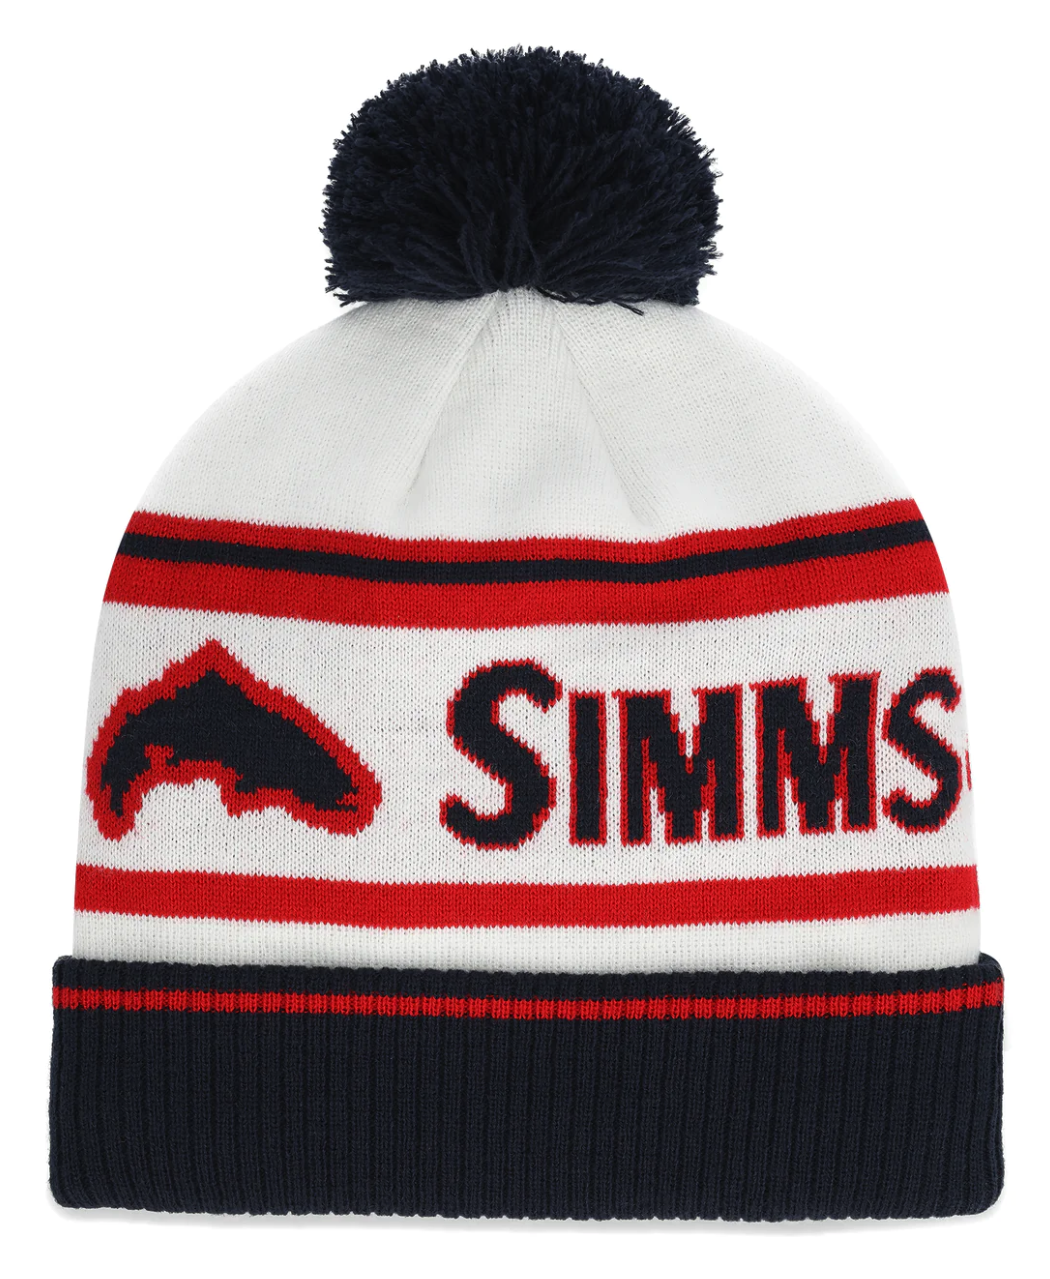 Order Simms Tip-Up Pom Beanie online at Simms online dealer TheFlyFishers.com.